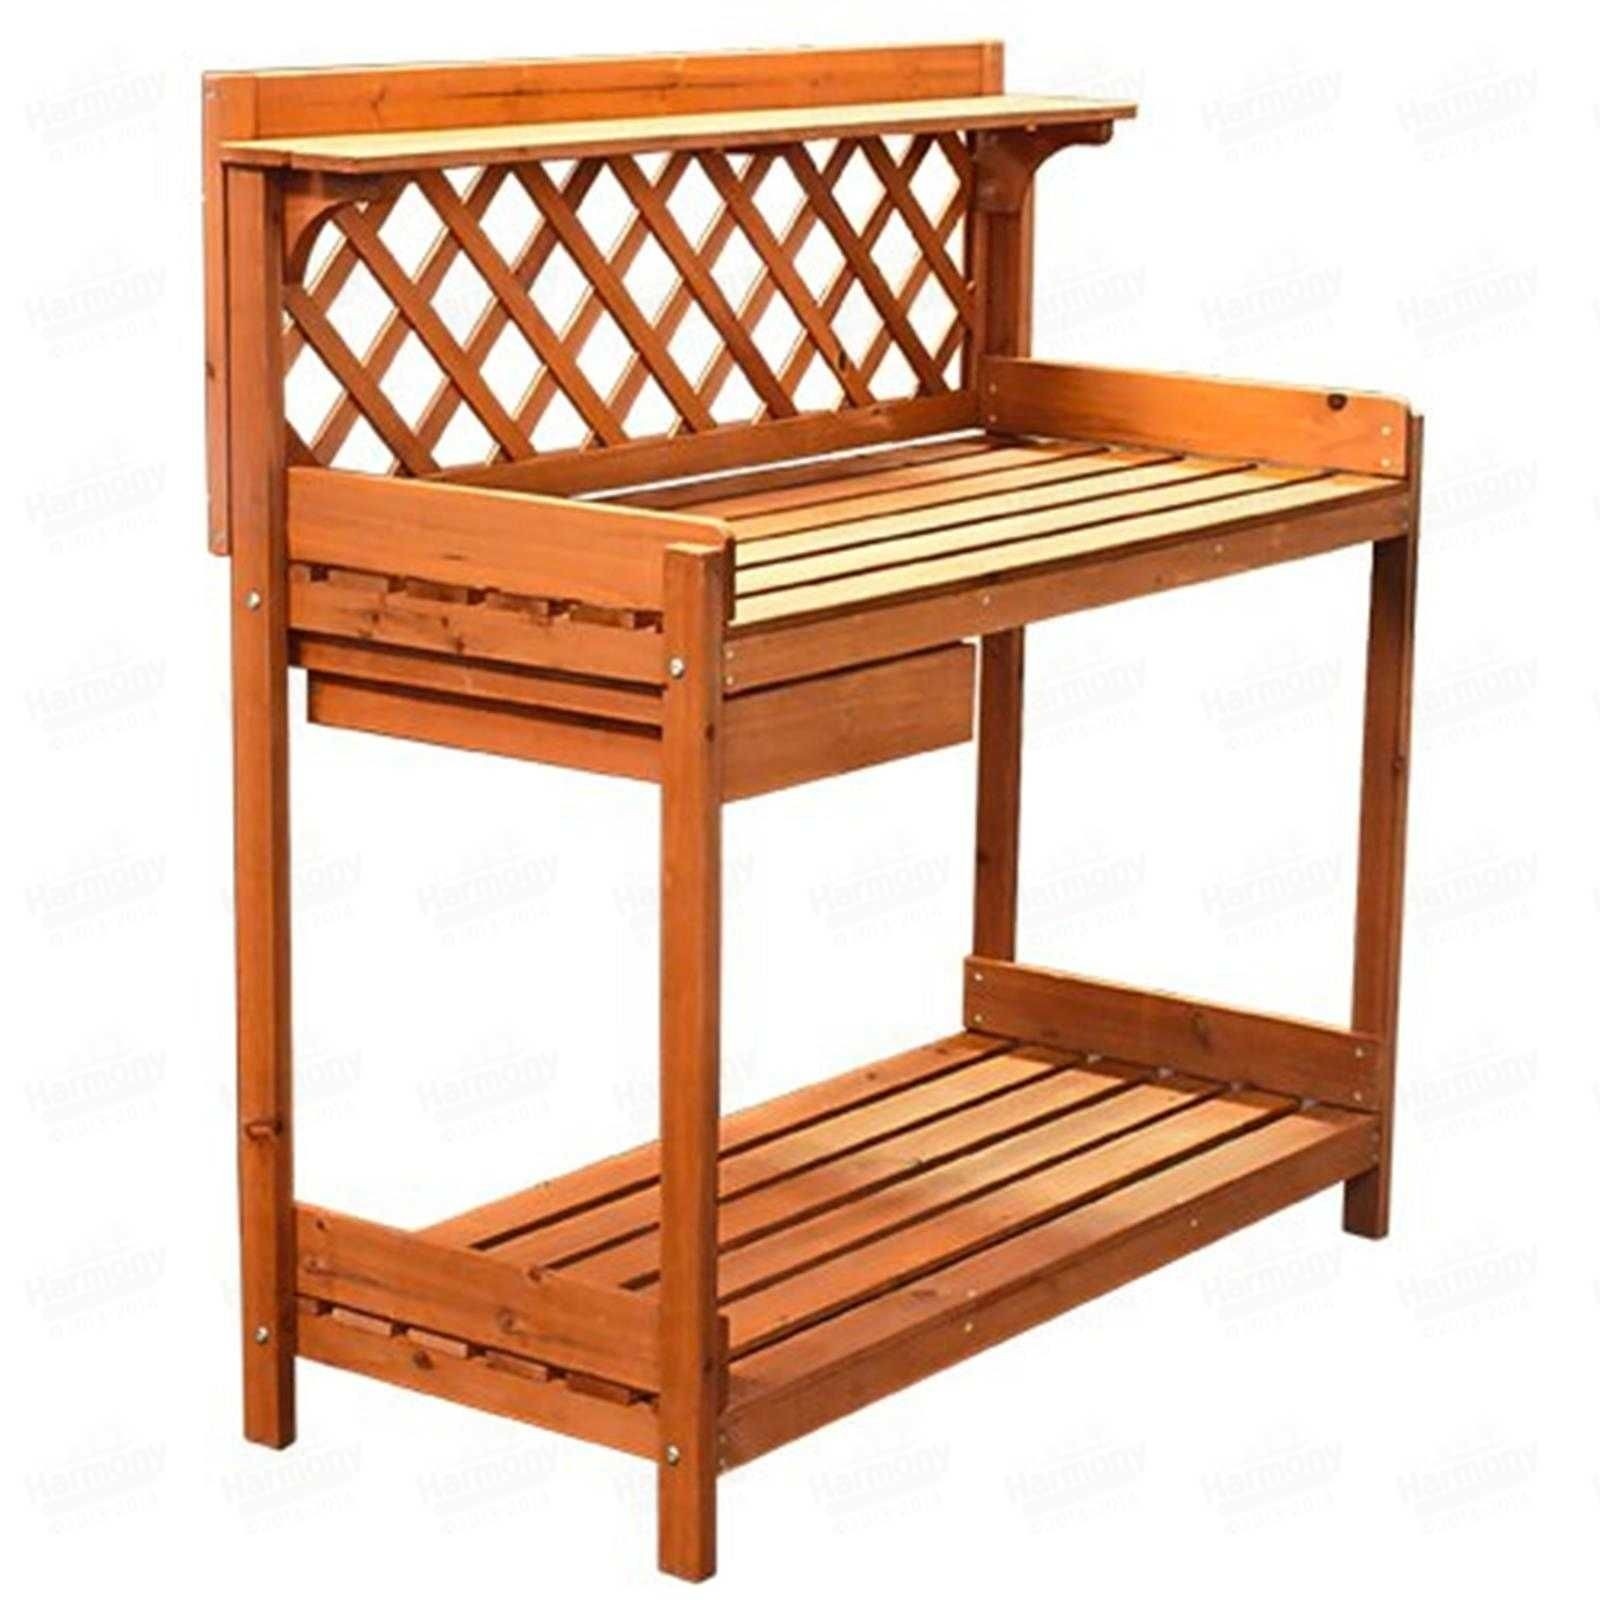 Wood Potting Bench Garden Outdoor Work Bench Table Planting Bench